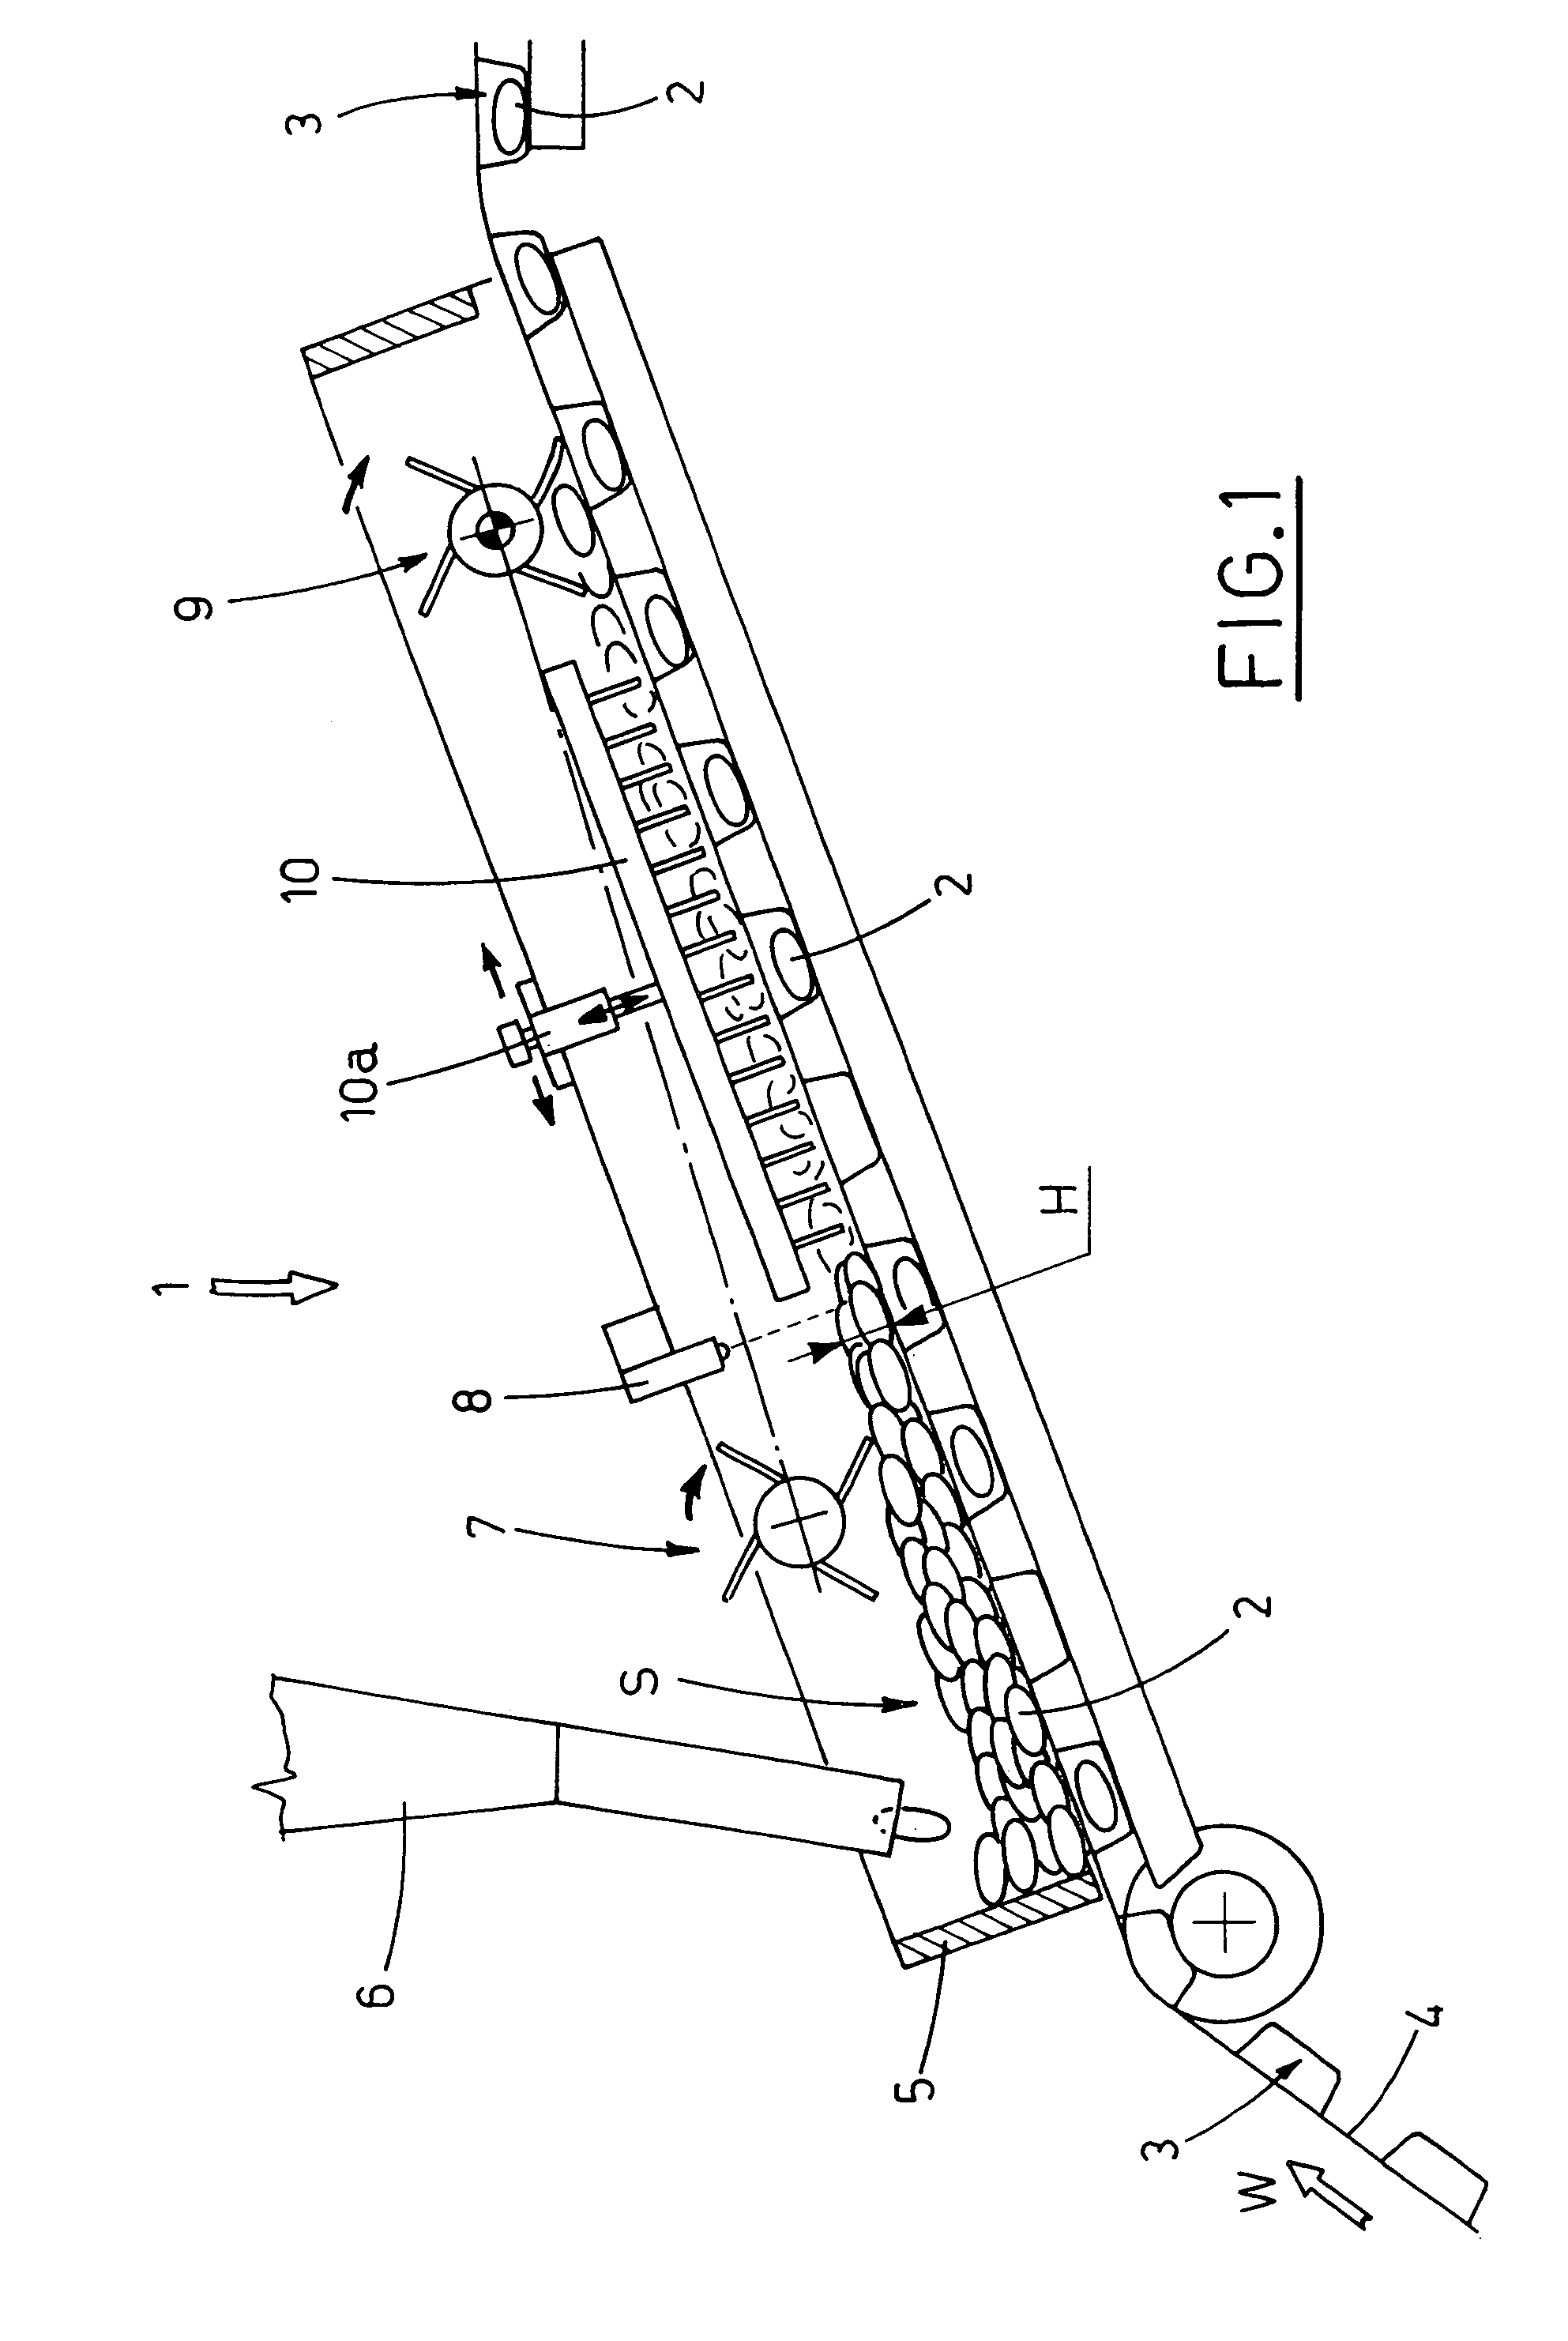 Apparatus for feeding articles to a blister band